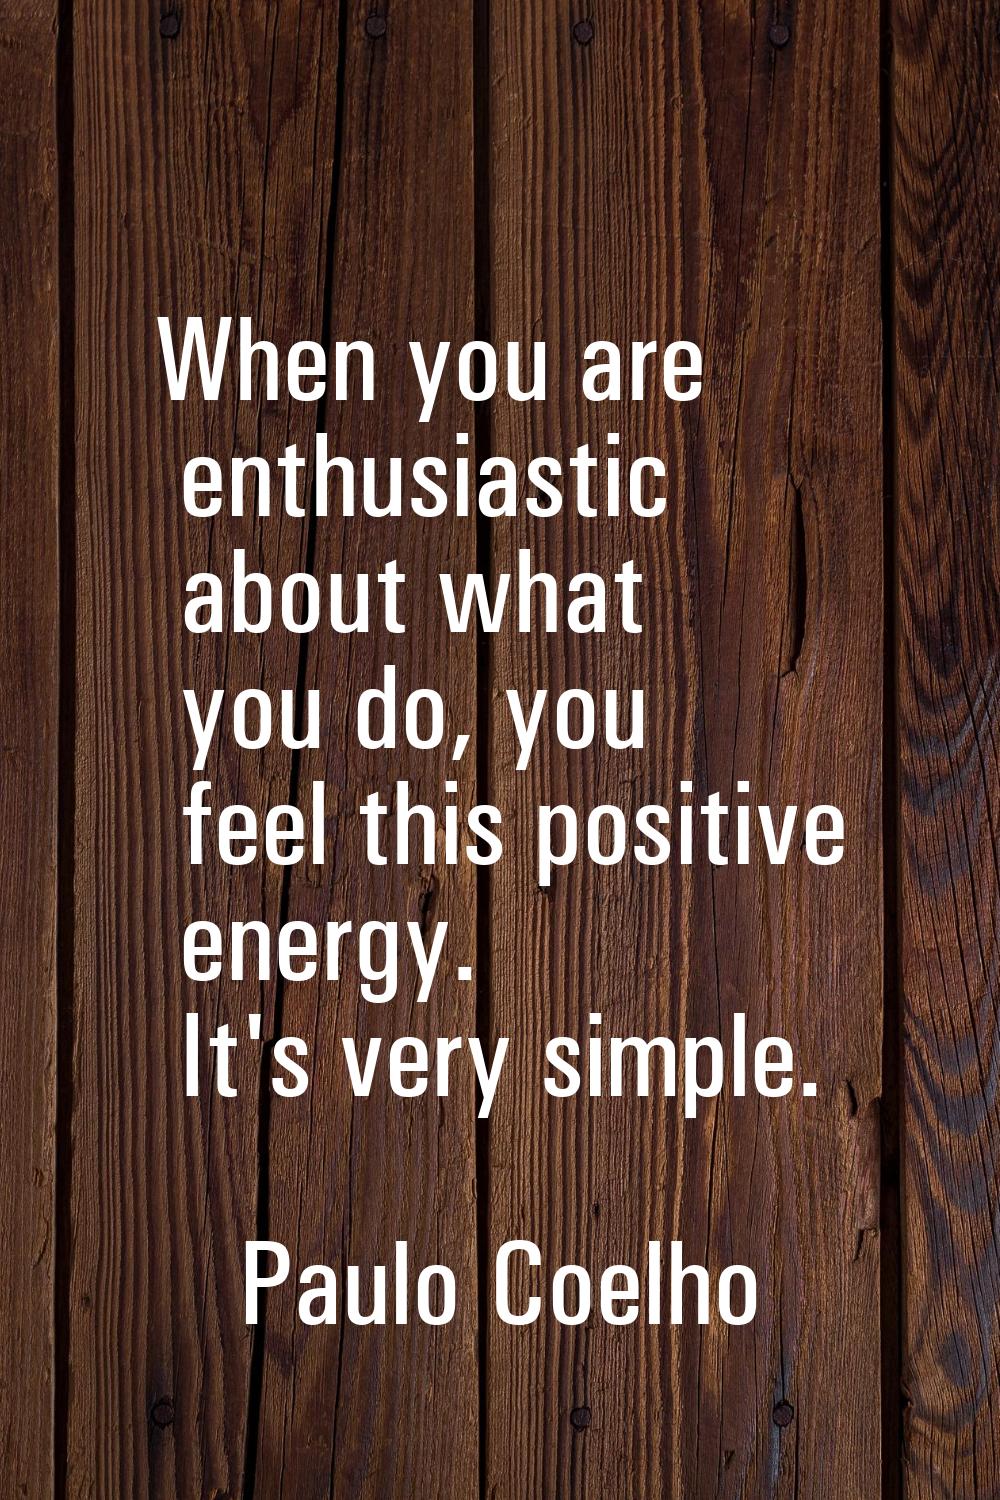 When you are enthusiastic about what you do, you feel this positive energy. It's very simple.